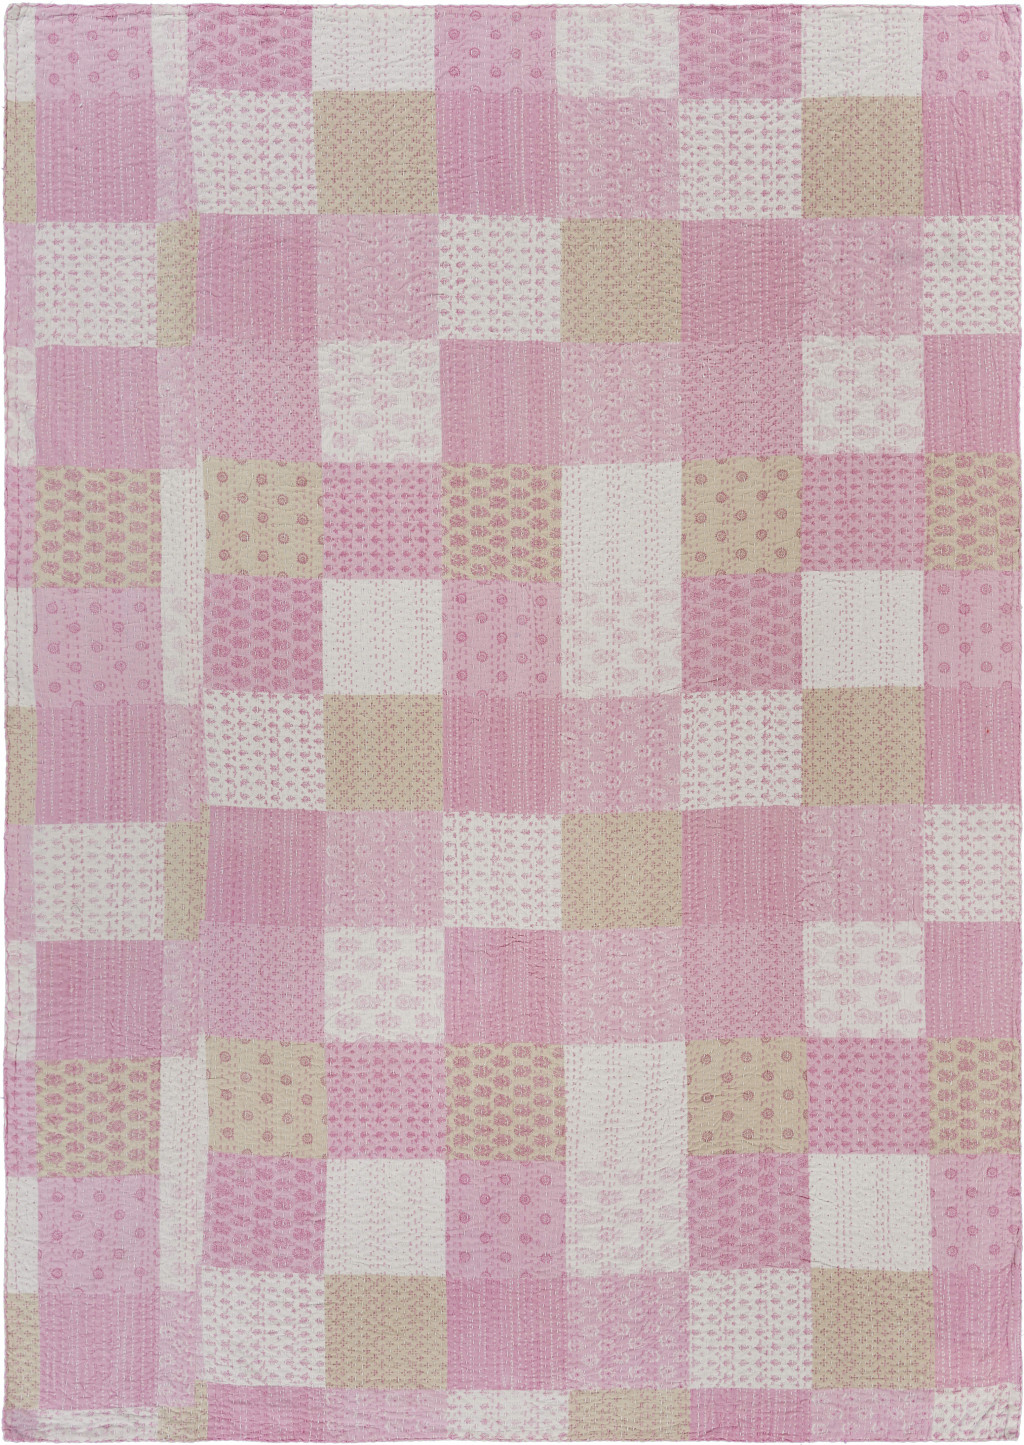 Pink Knitted Cotton Patchwork Throw Blanket-516585-1